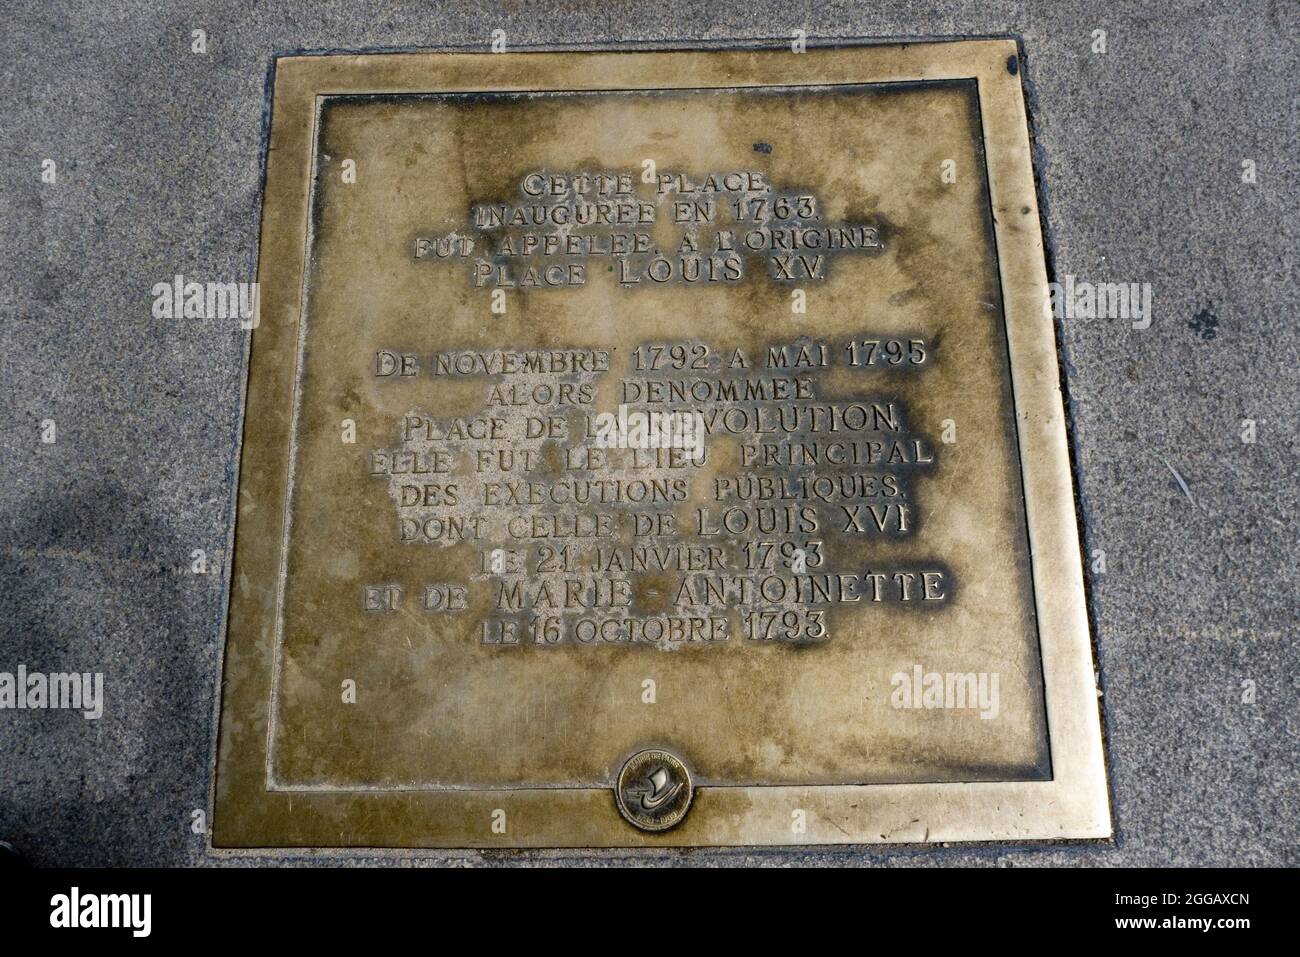 Plaque denoting Louis XVI and Marie Antoinette execution for treason at the base of the Obelisk in the Place de la Concorde Paris France Stock Photo